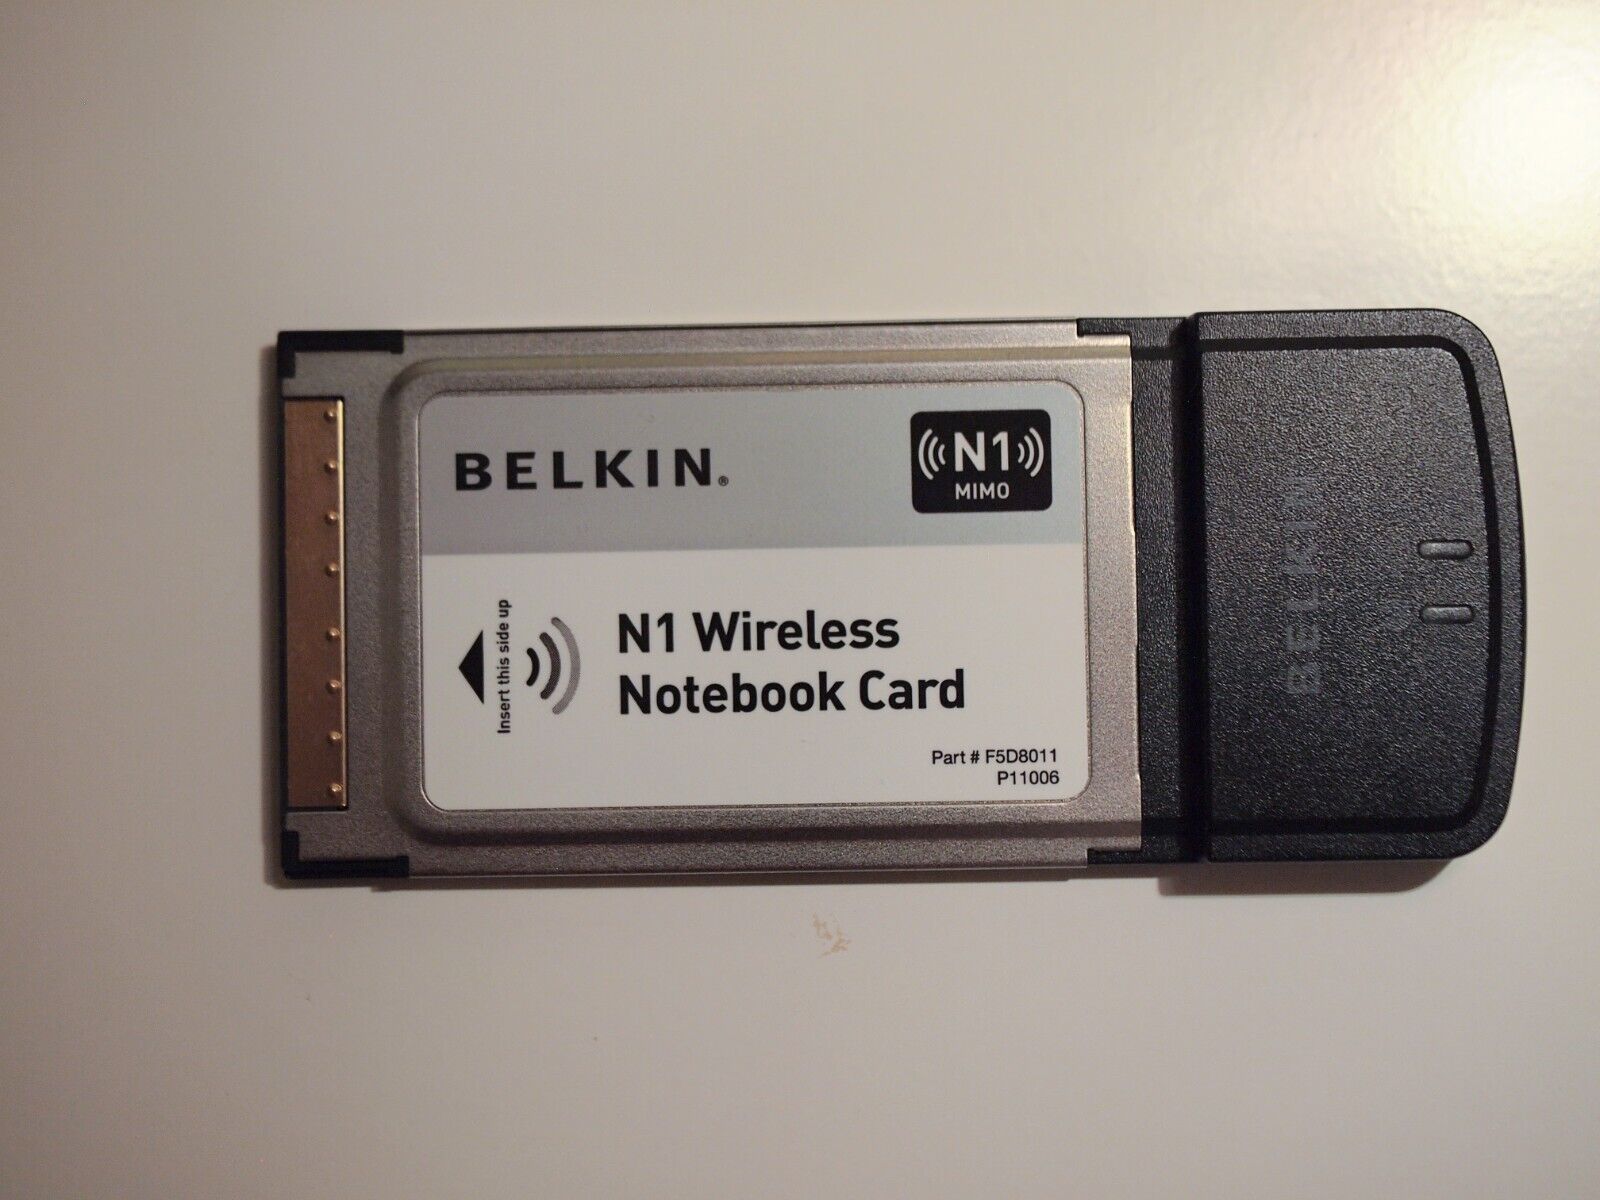 Belkin N1 MIMO Wireless Notebook Card. Almost never used and 100% working.